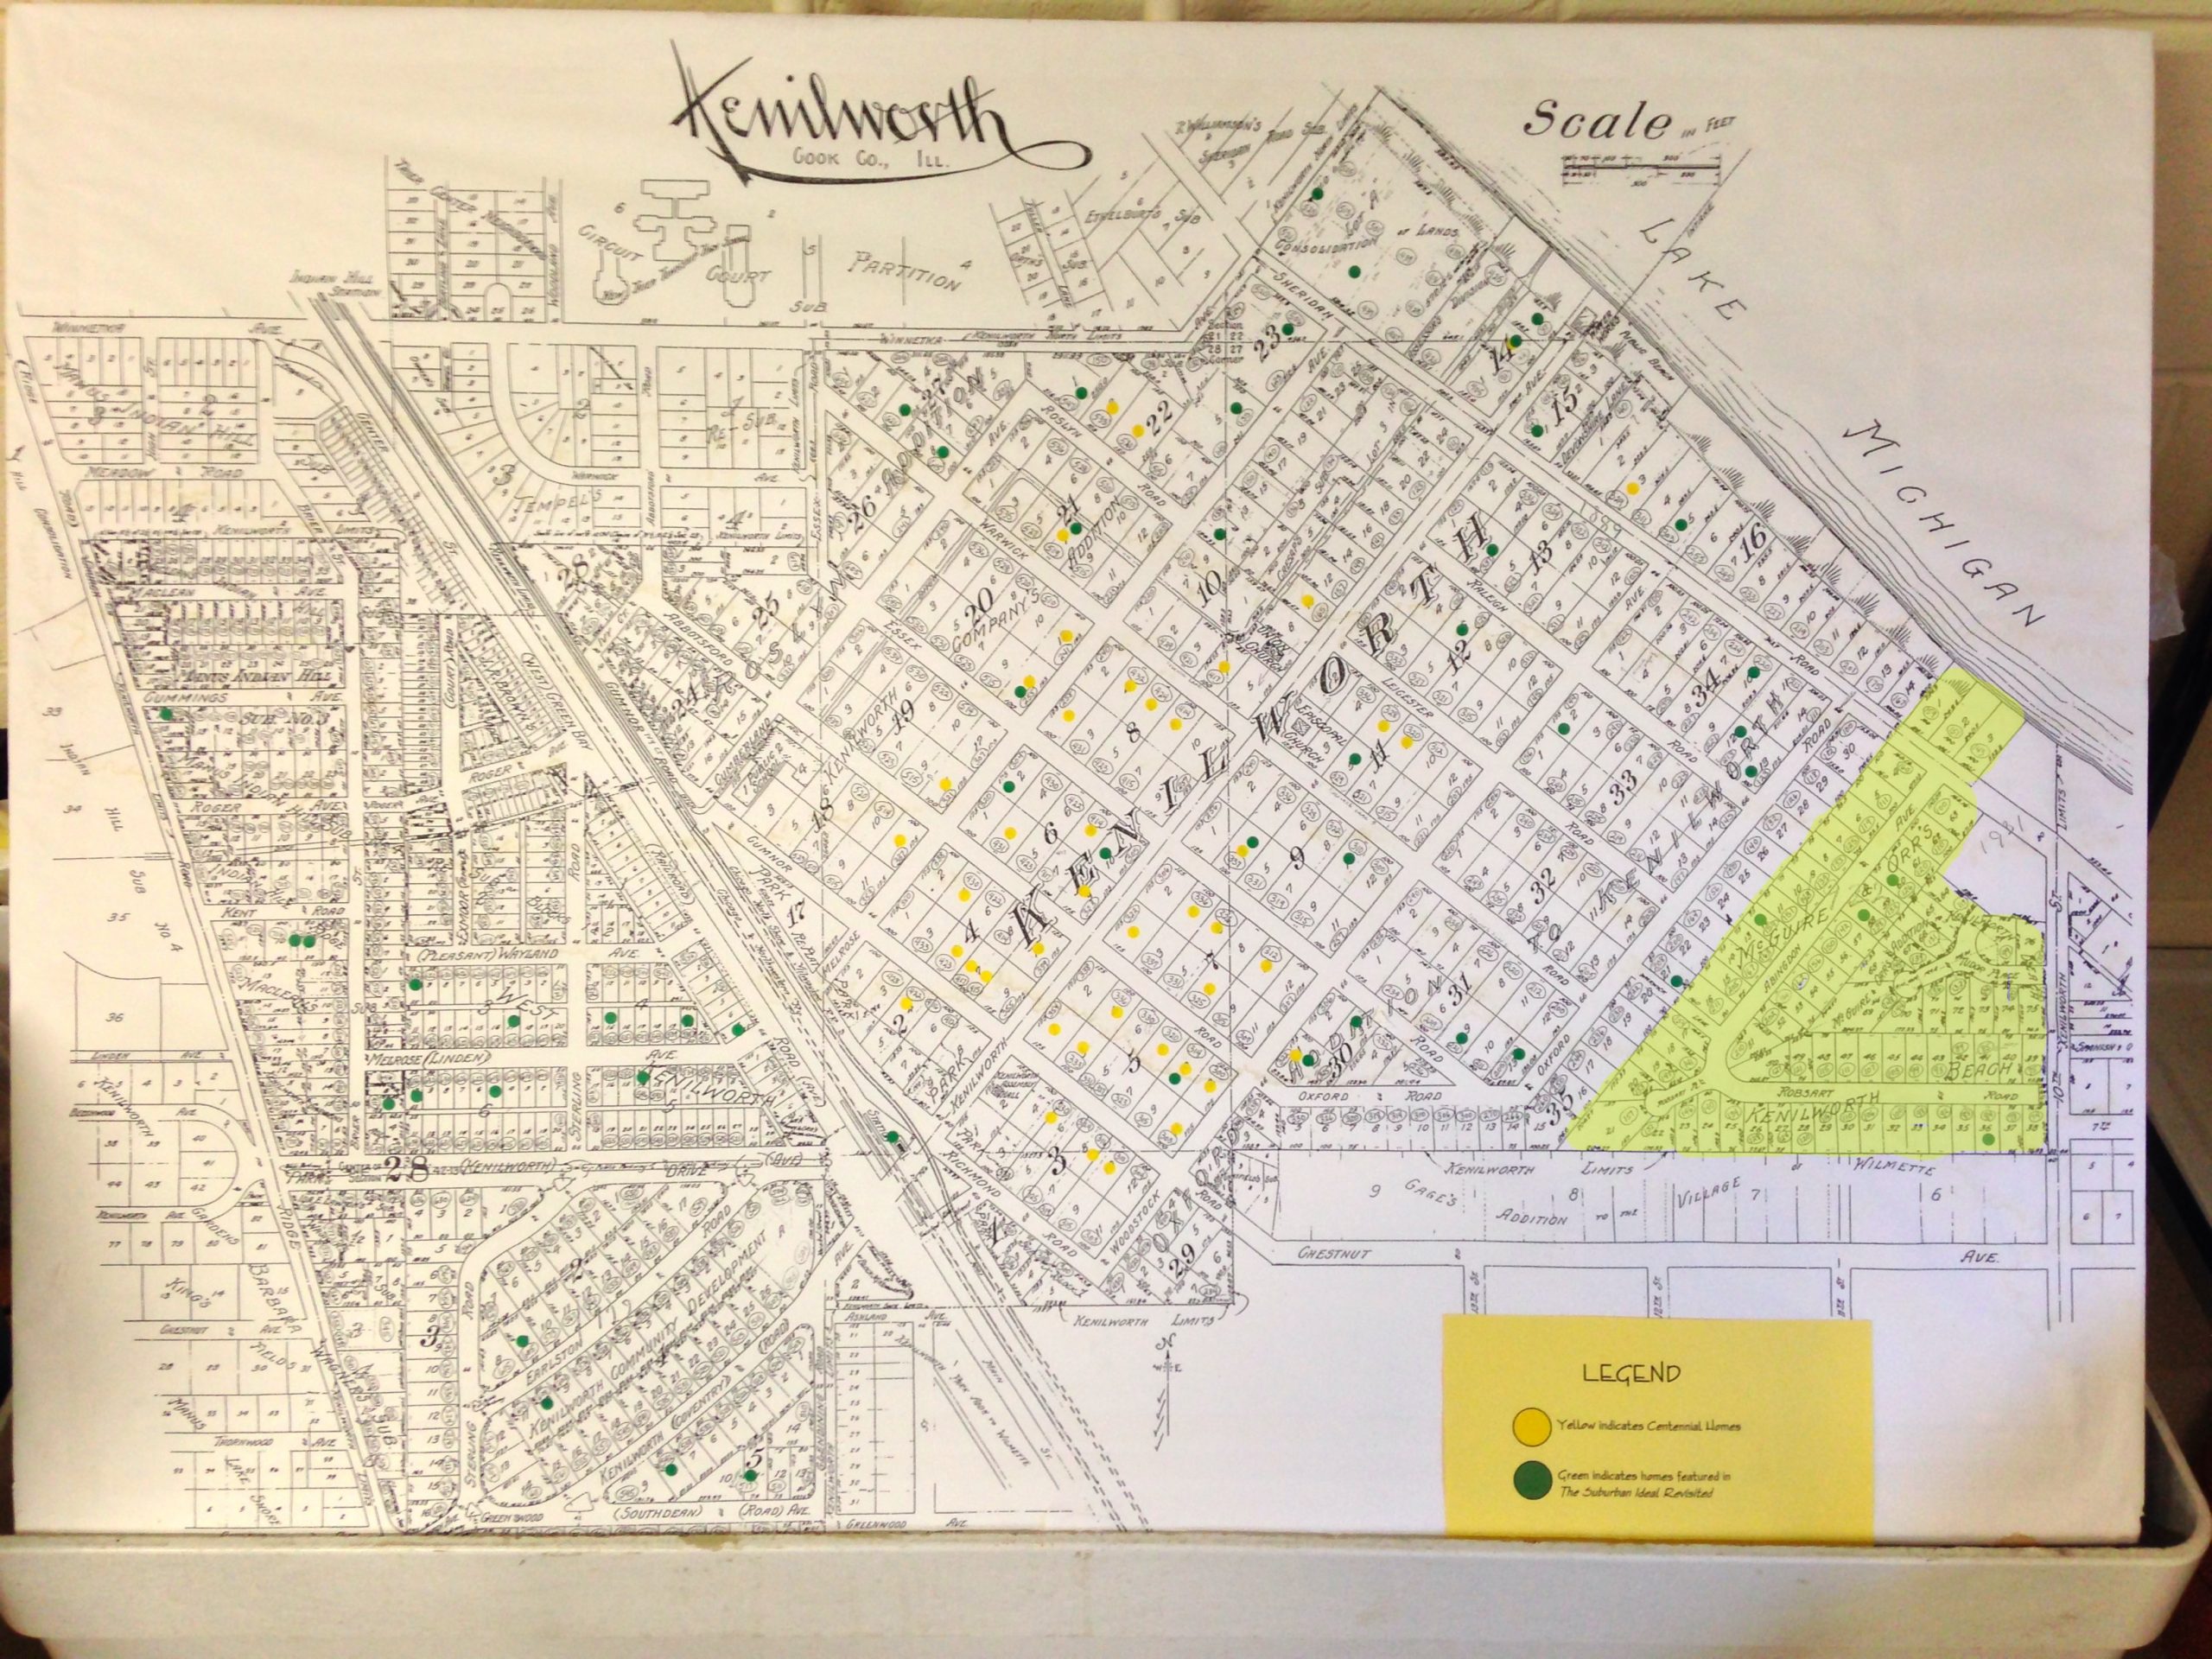 Map of Kenilworth. Kenilworth Beach subdivision highlighted in yellow.